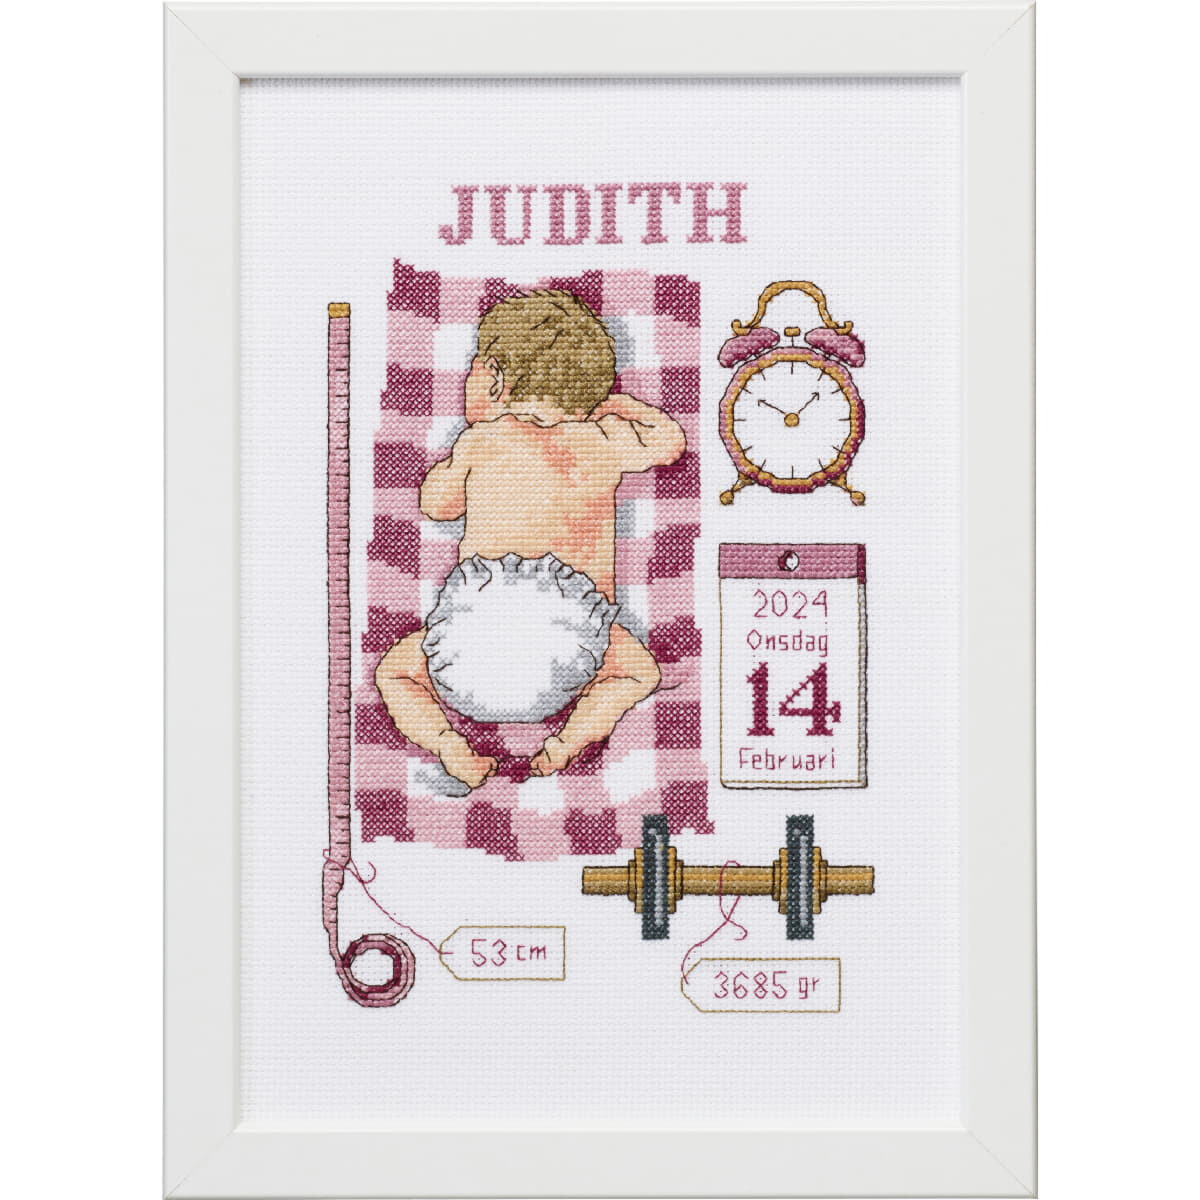 Permin counted cross stitch kit "Judith",...